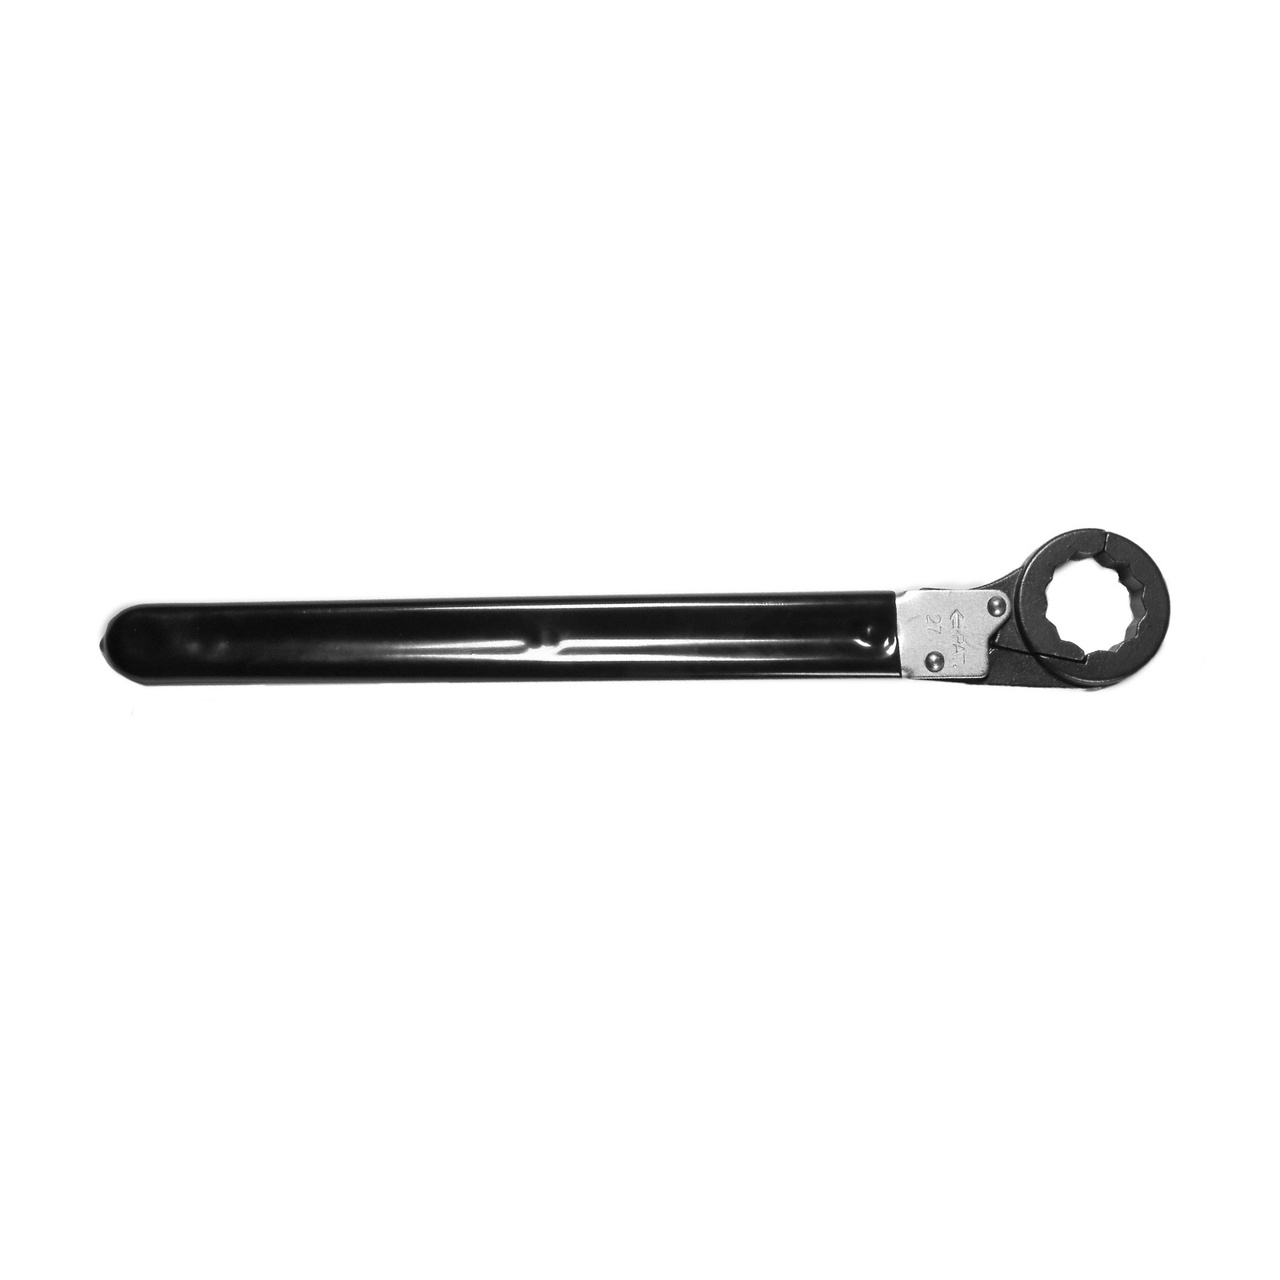 Open Ratchet Wrench 12 mm